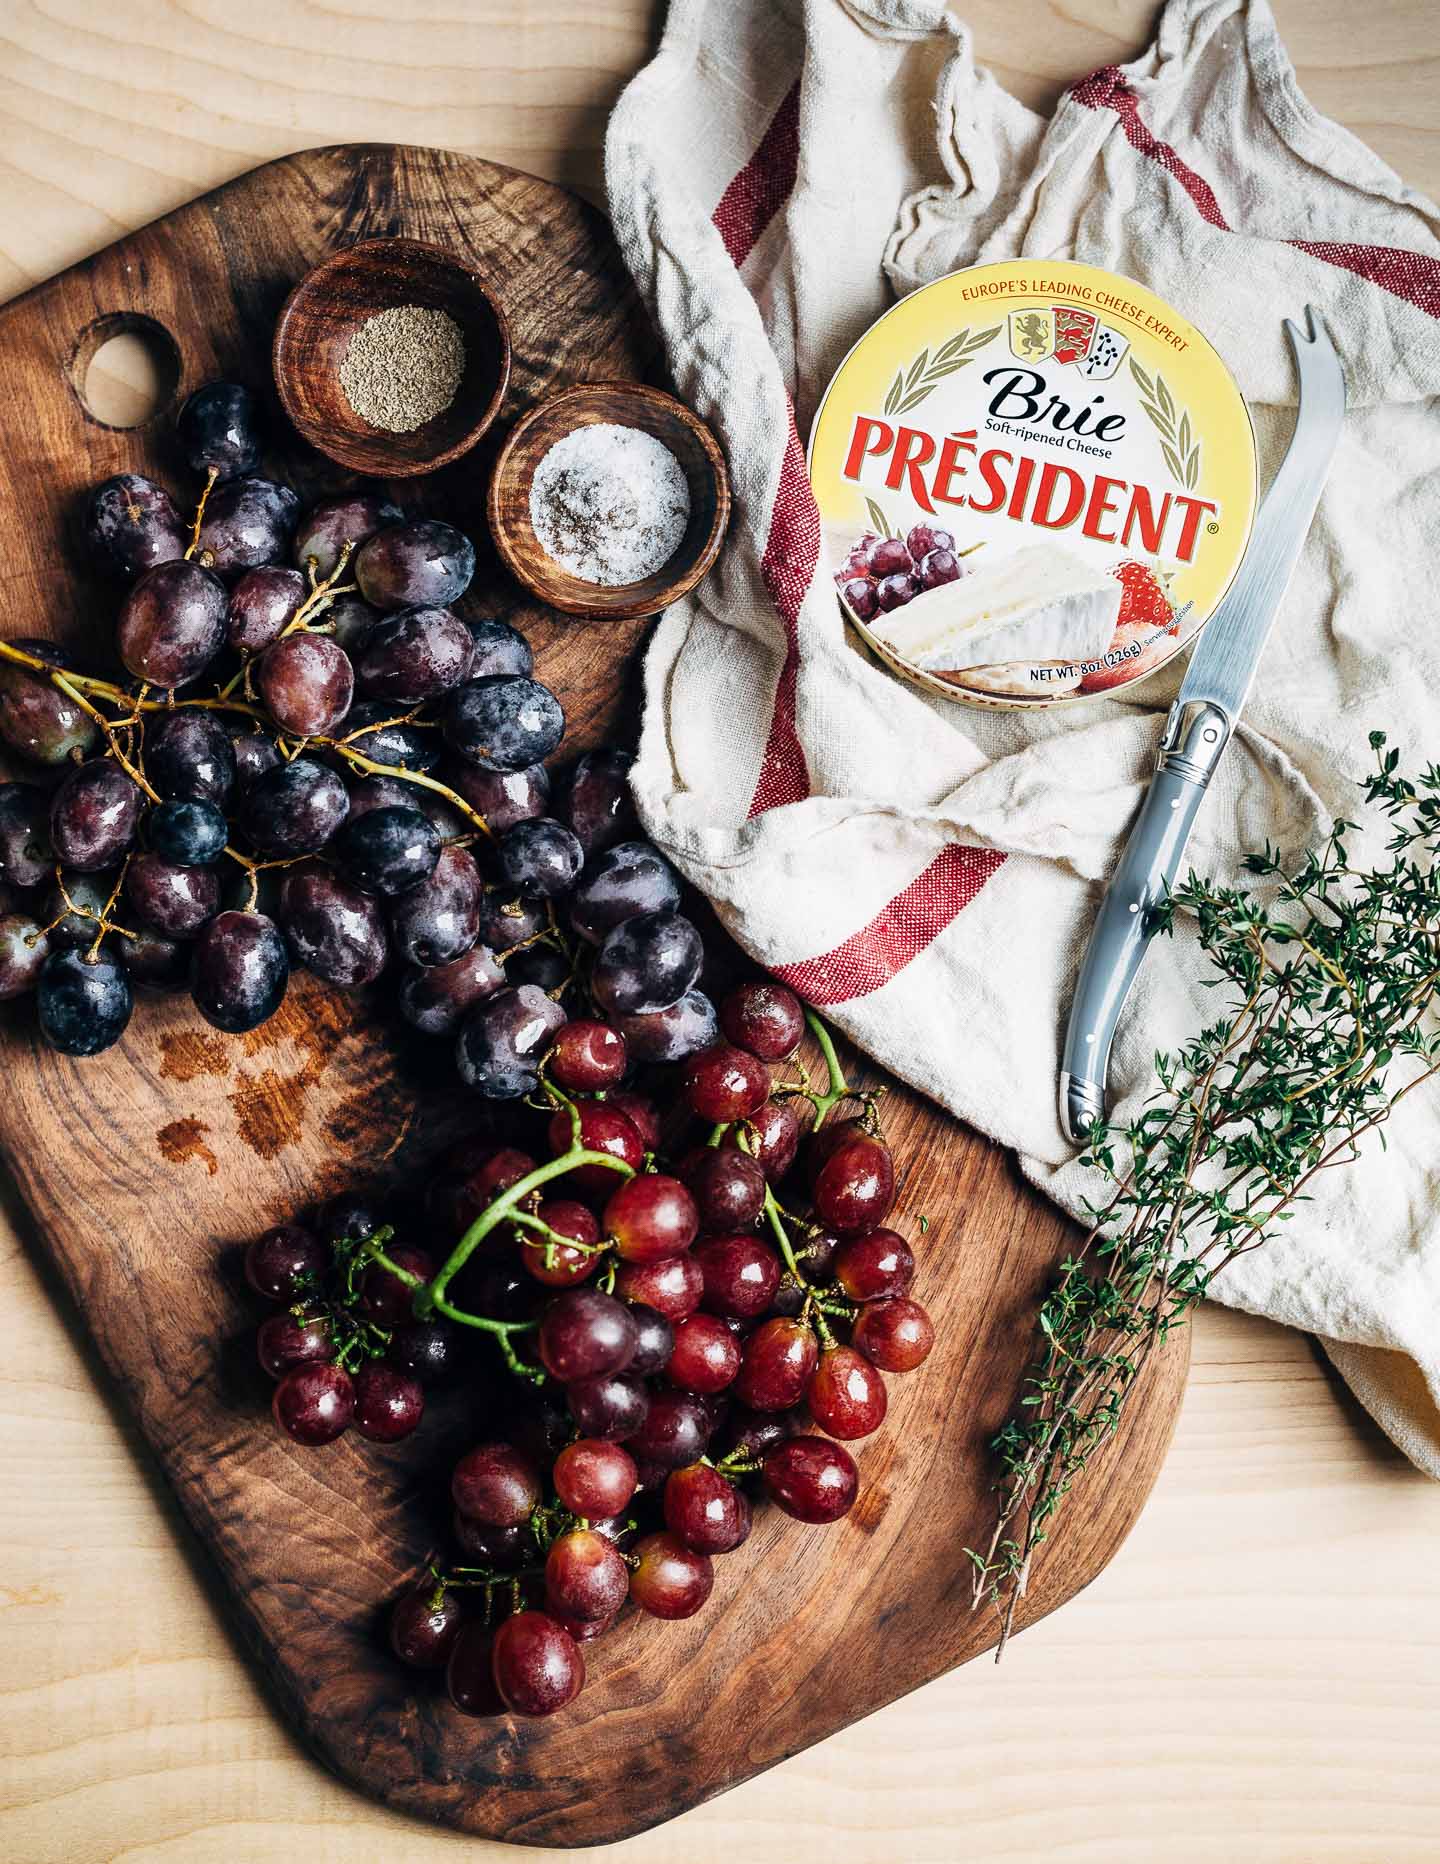 Black and red grapes, fresh thyme, and President brie. 